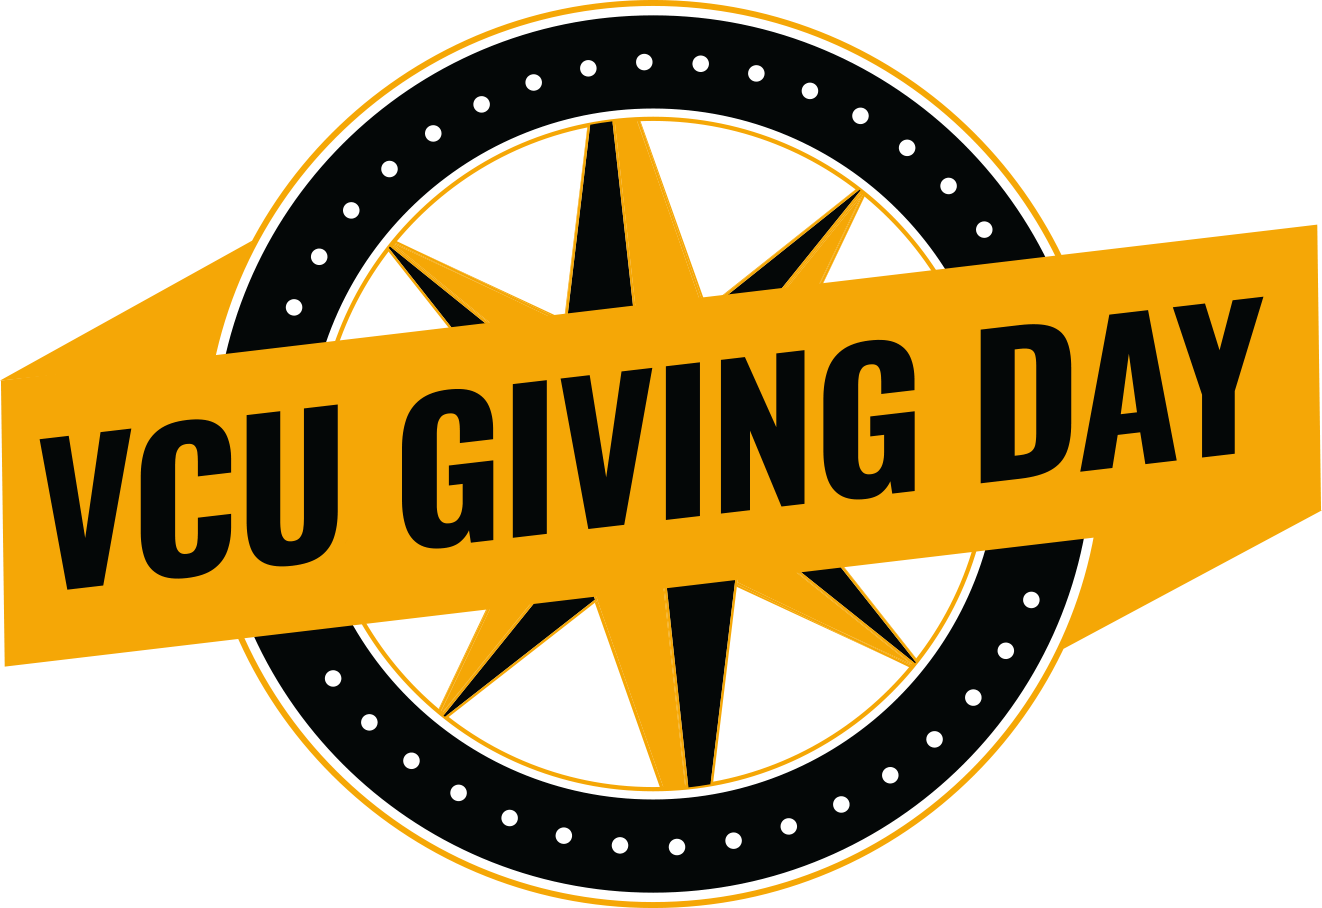 Giving Day logo with VCU Giving Day banner overlaid on a compass shape